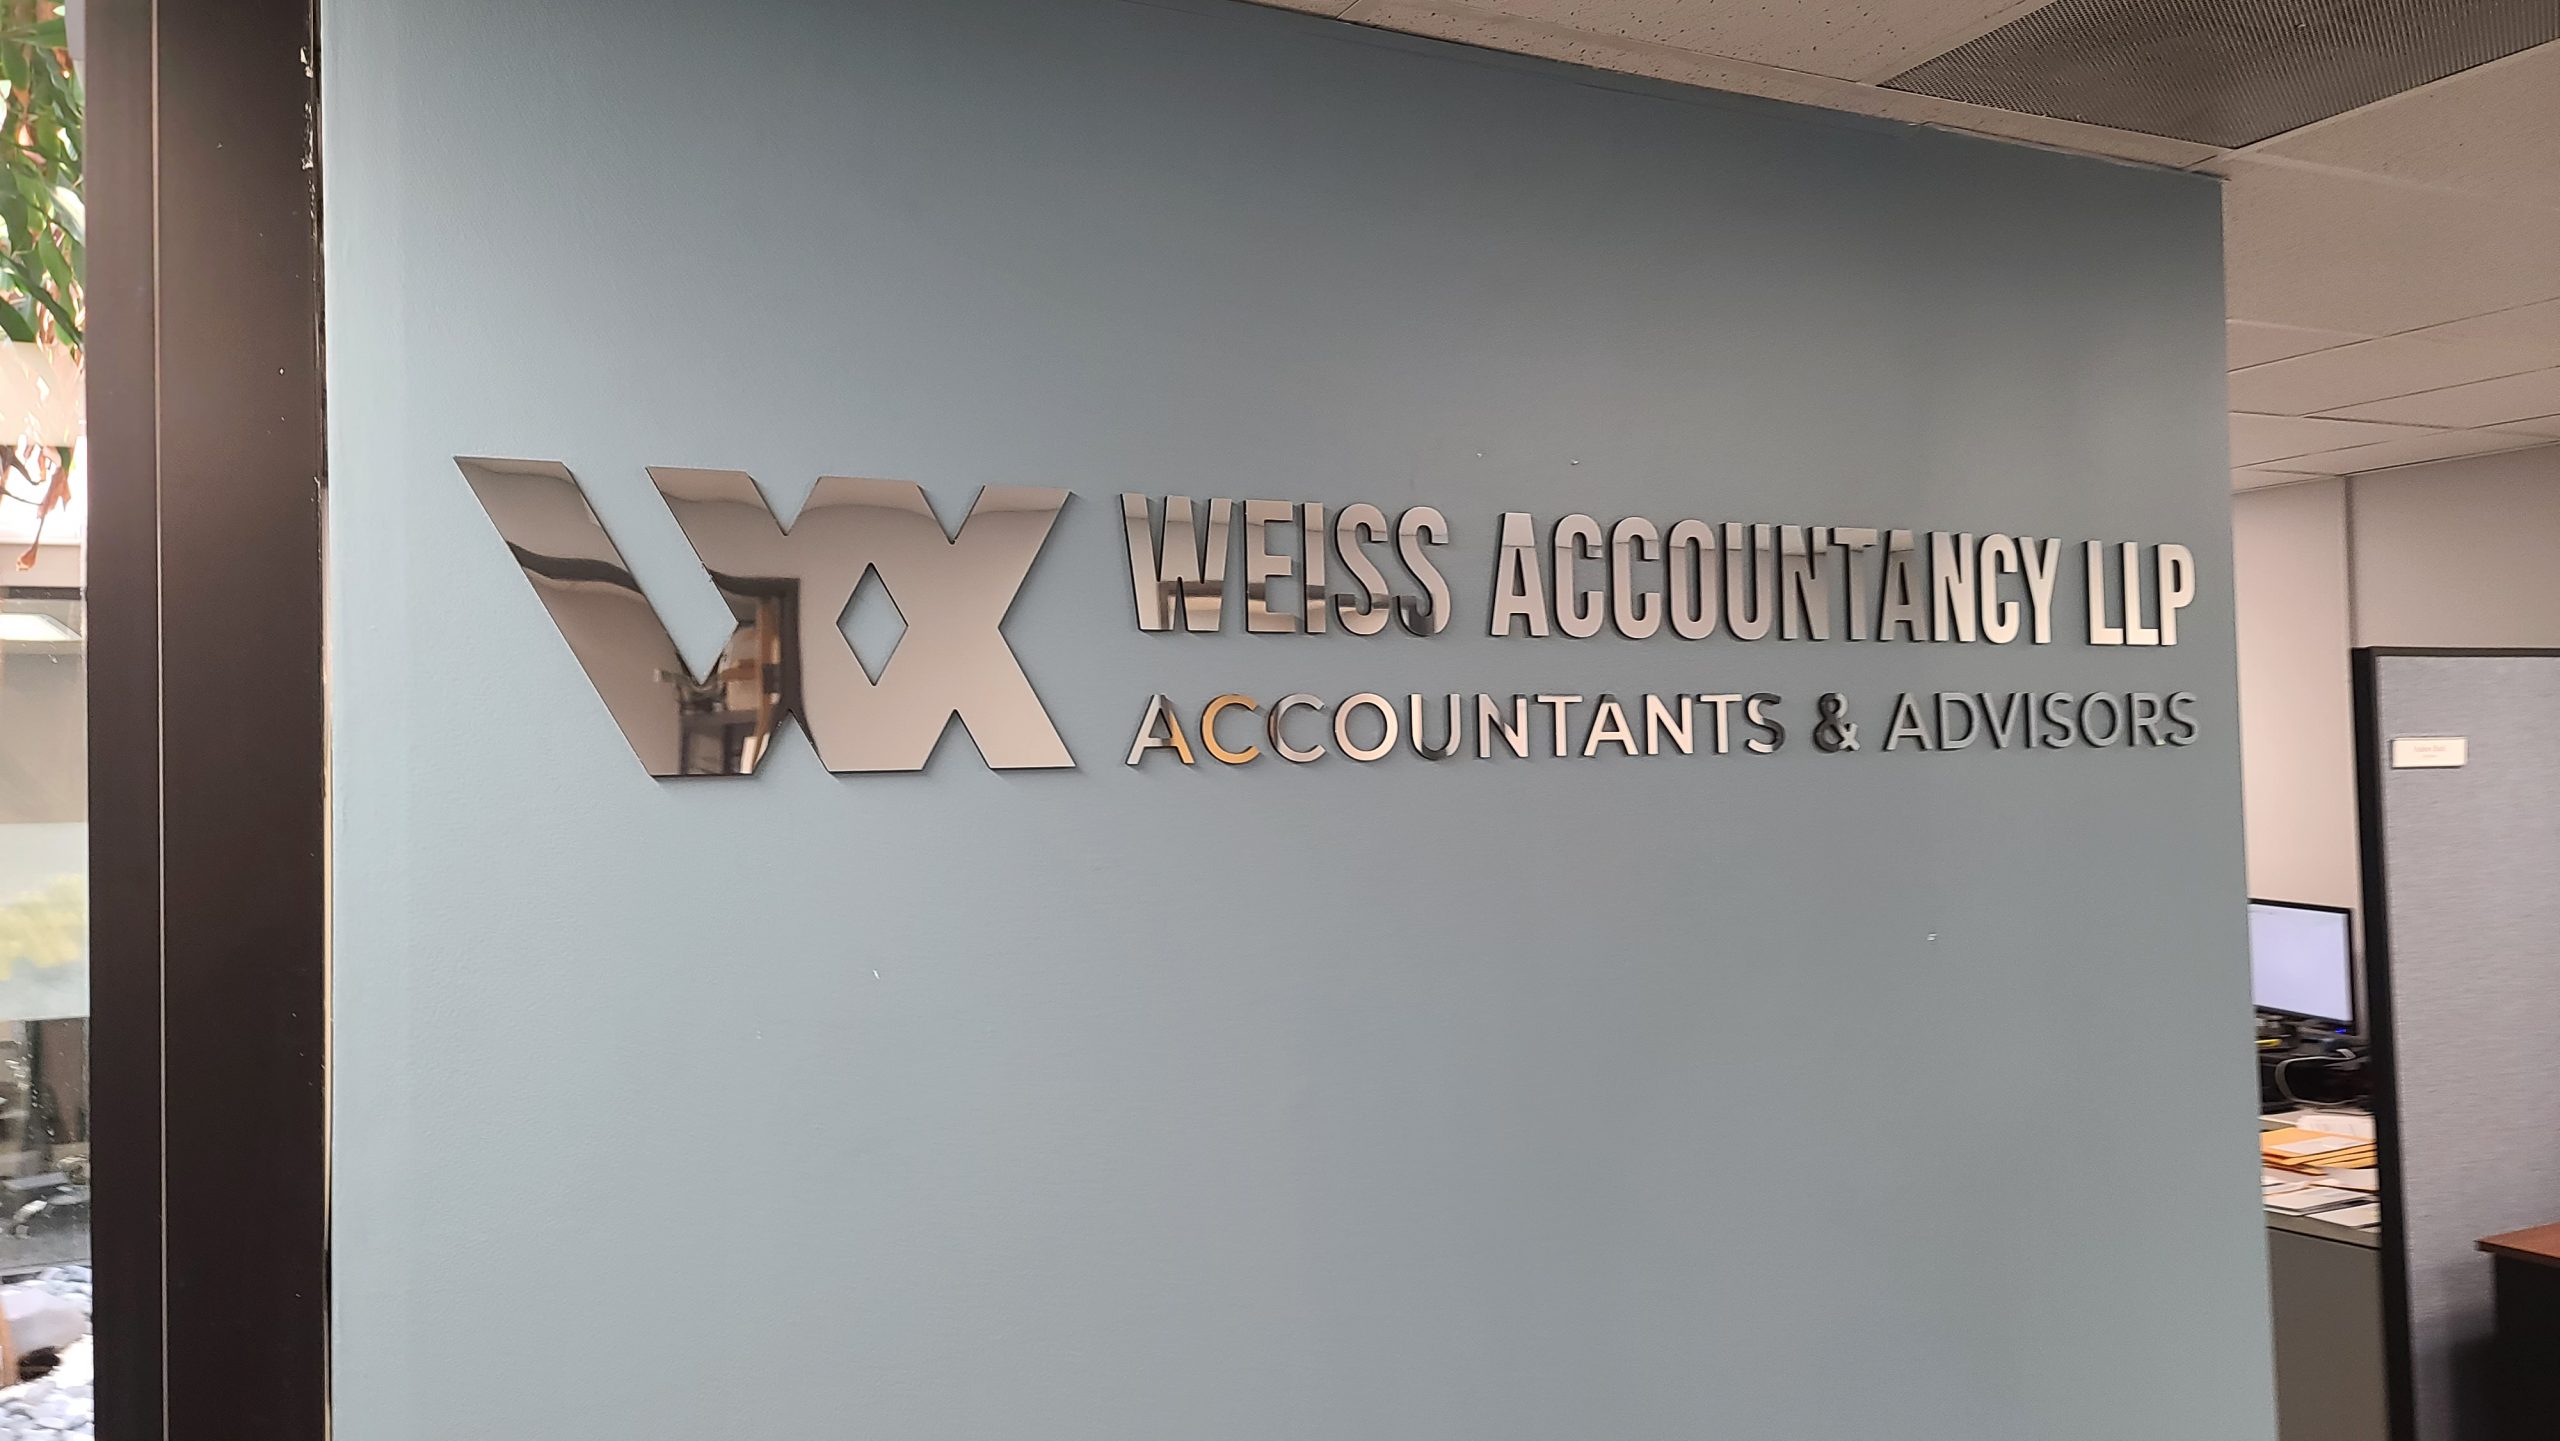 Another lobby sign for our friends at Weiss Accountancy, for their Van Nuys' office. This metal polished acrylic lobby sign is a thing of beauty.